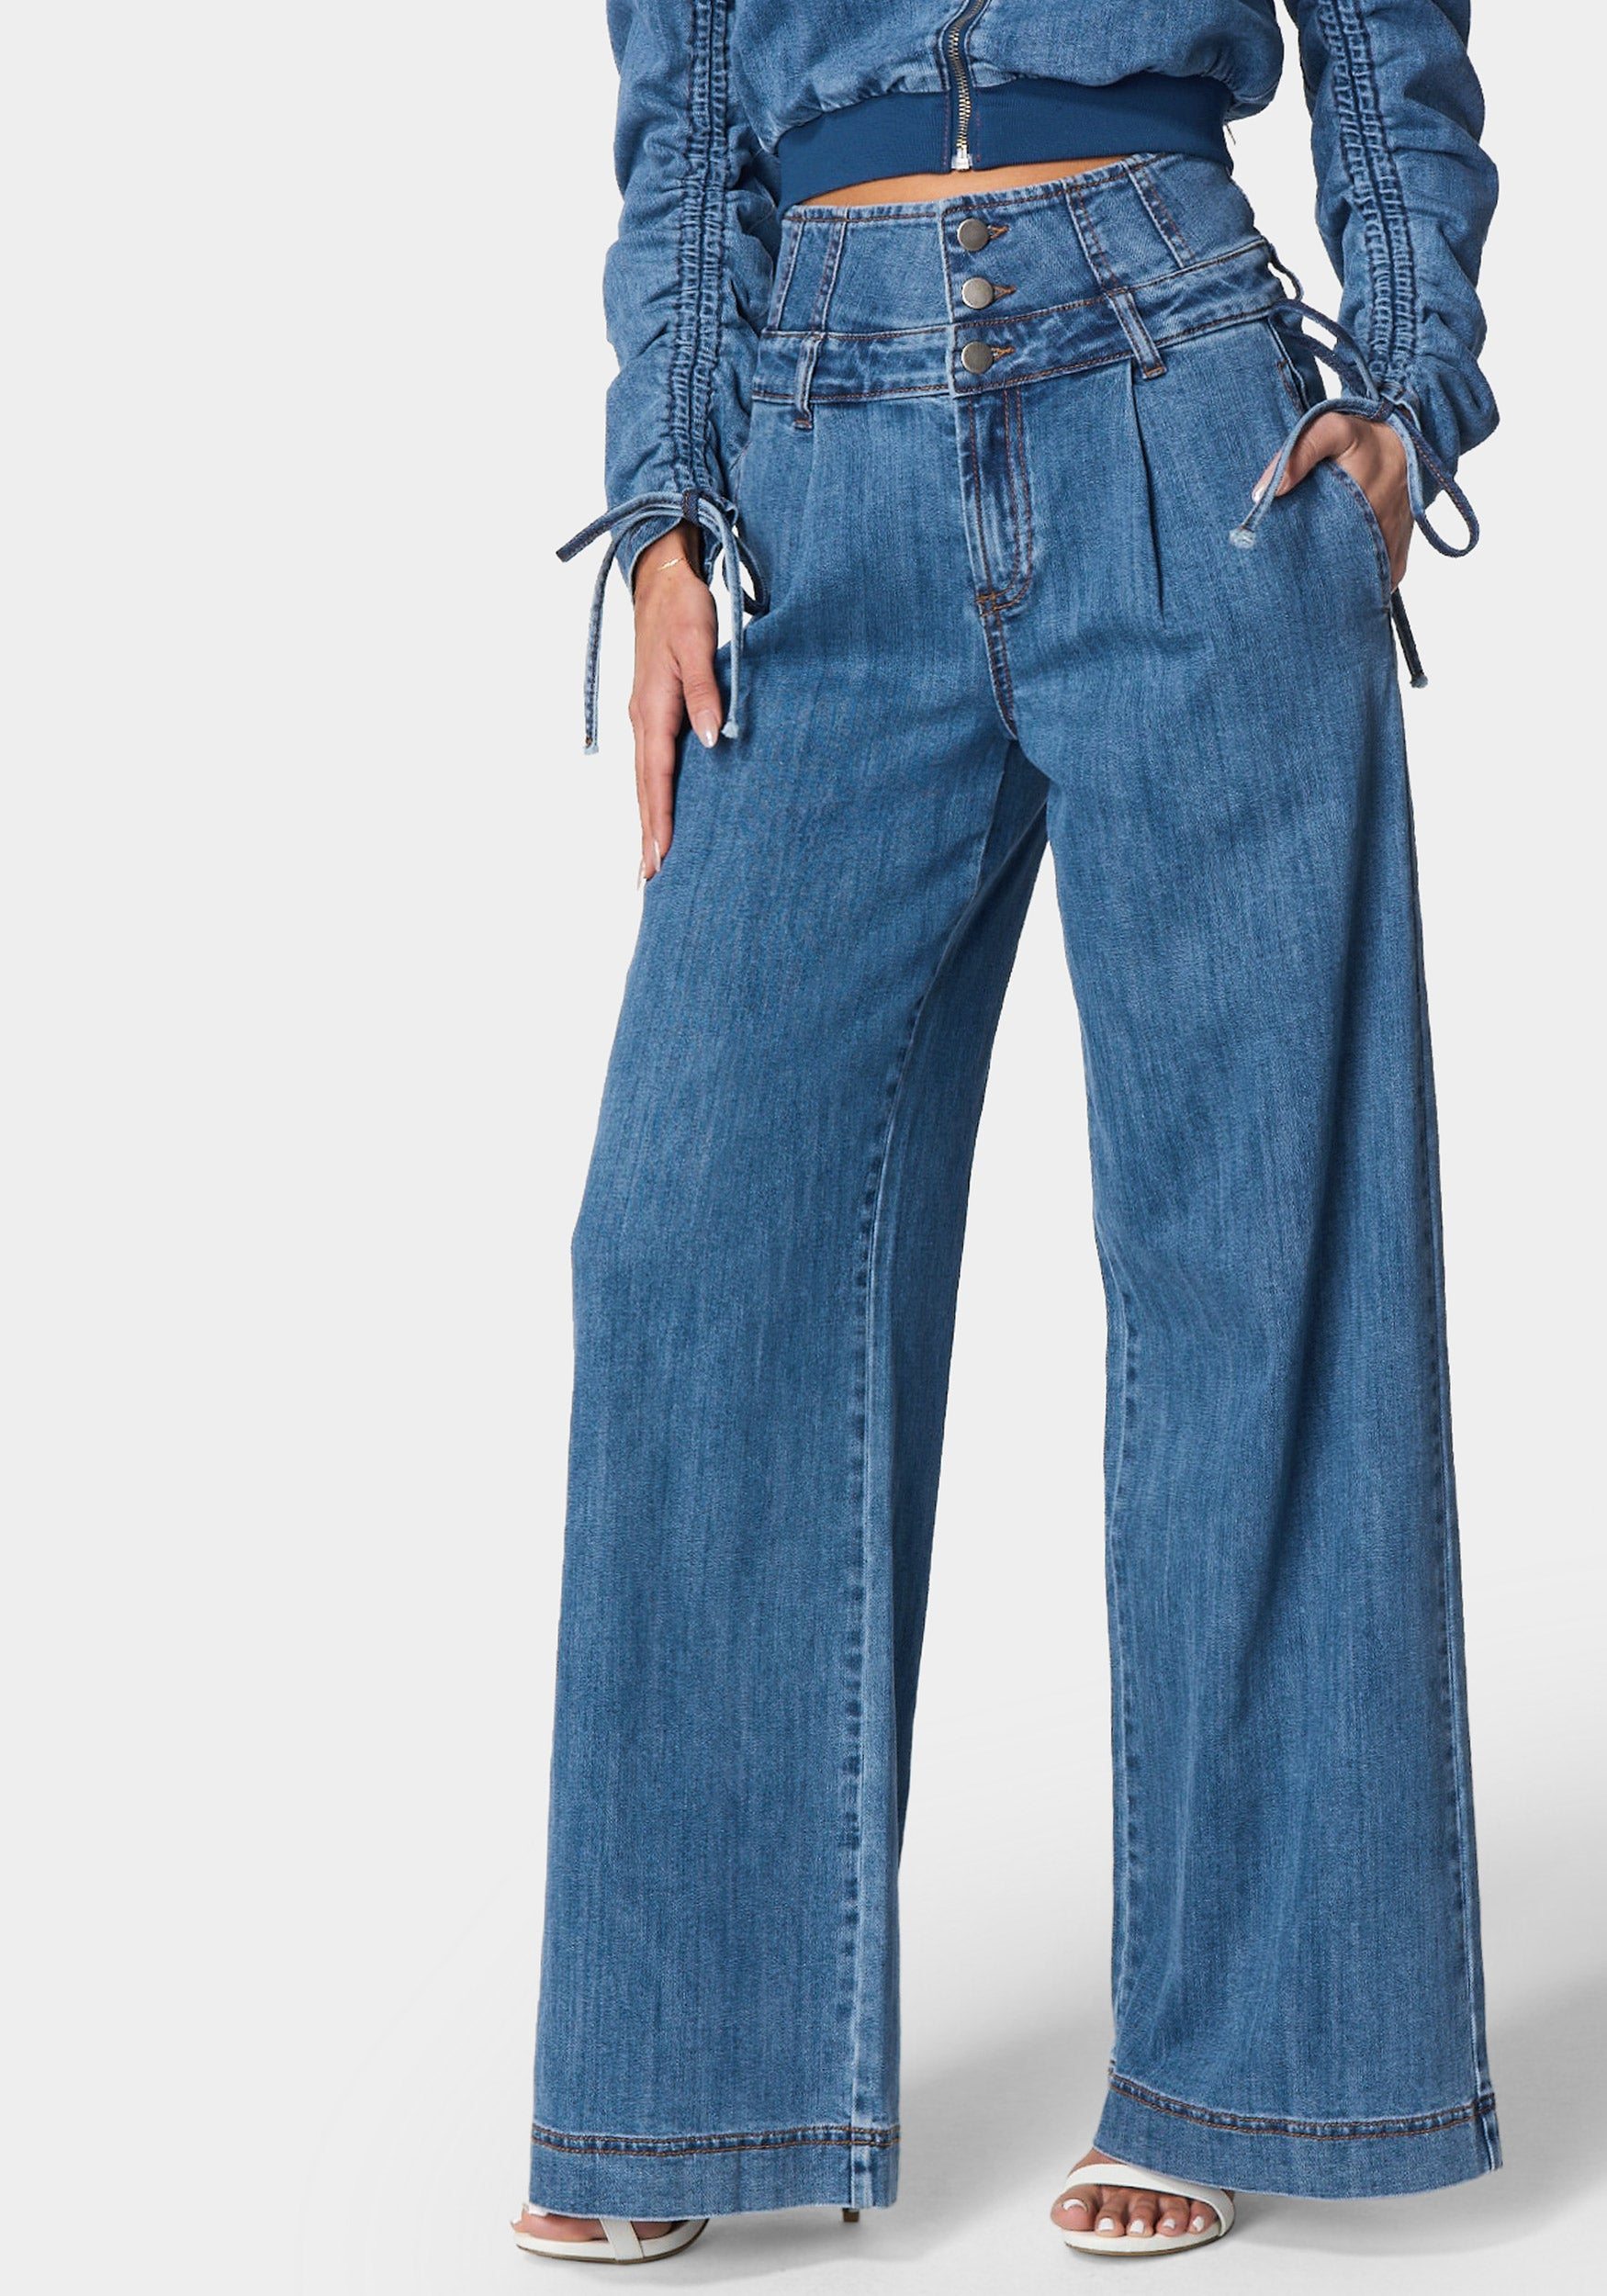 Image of High Waisted Build Up Corset Ultra Wide Leg Jeans